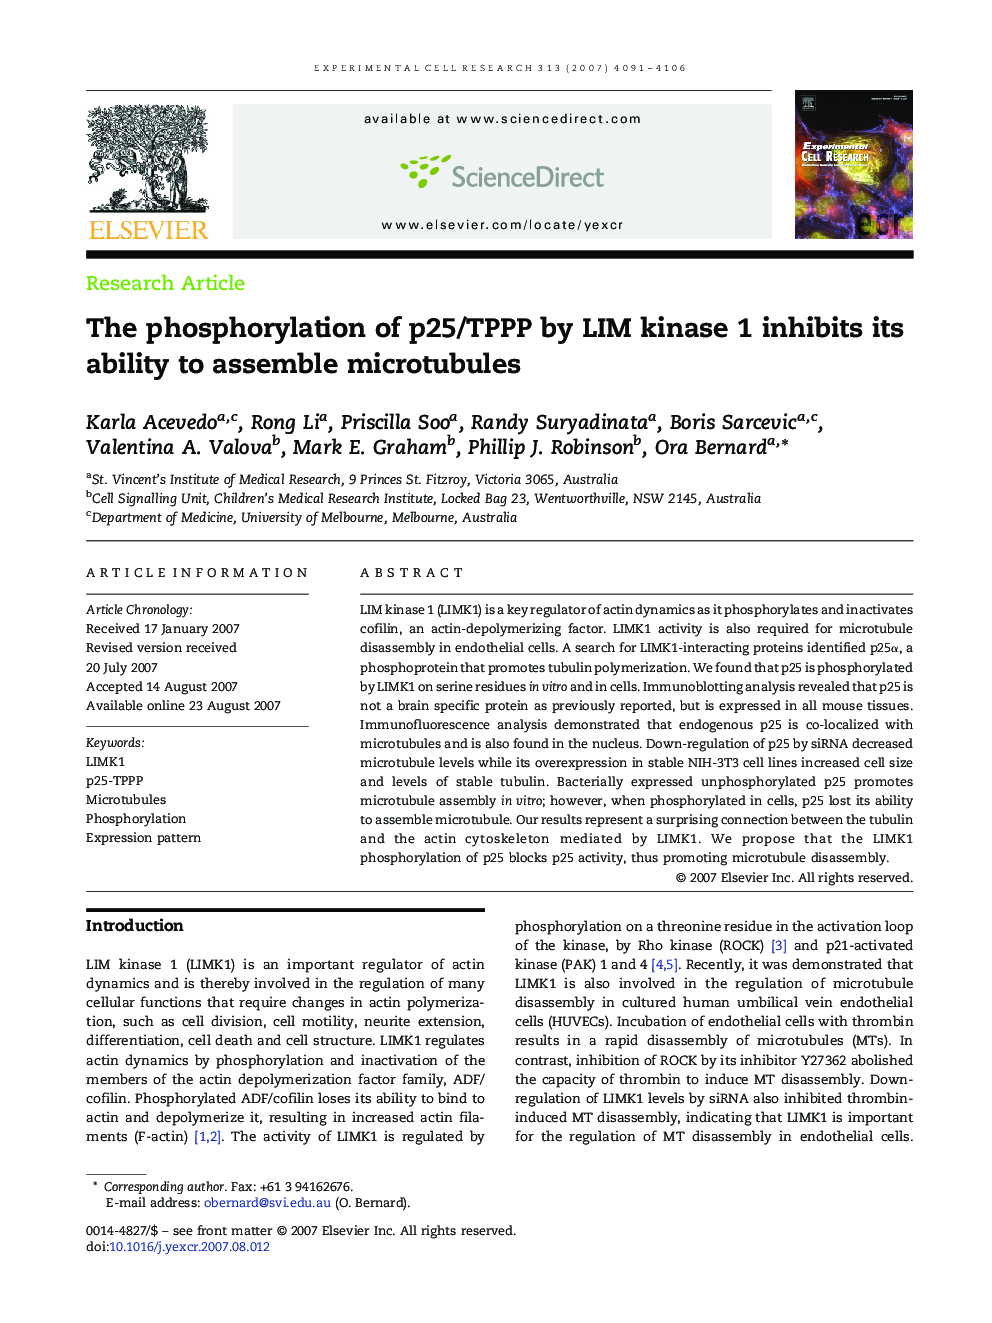 The phosphorylation of p25/TPPP by LIM kinase 1 inhibits its ability to assemble microtubules